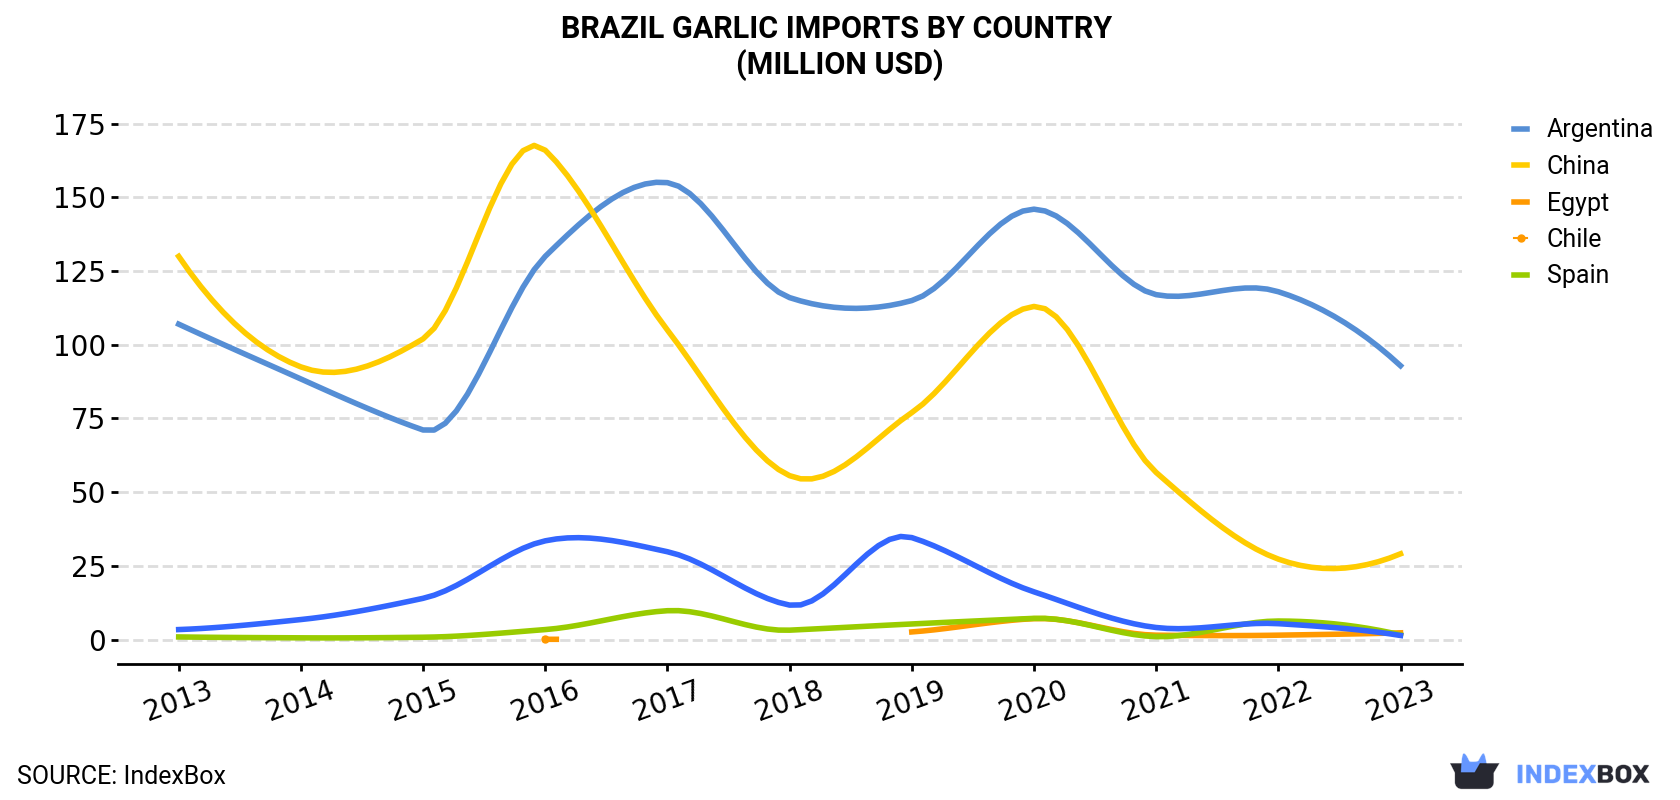 Brazil Garlic Imports By Country (Million USD)